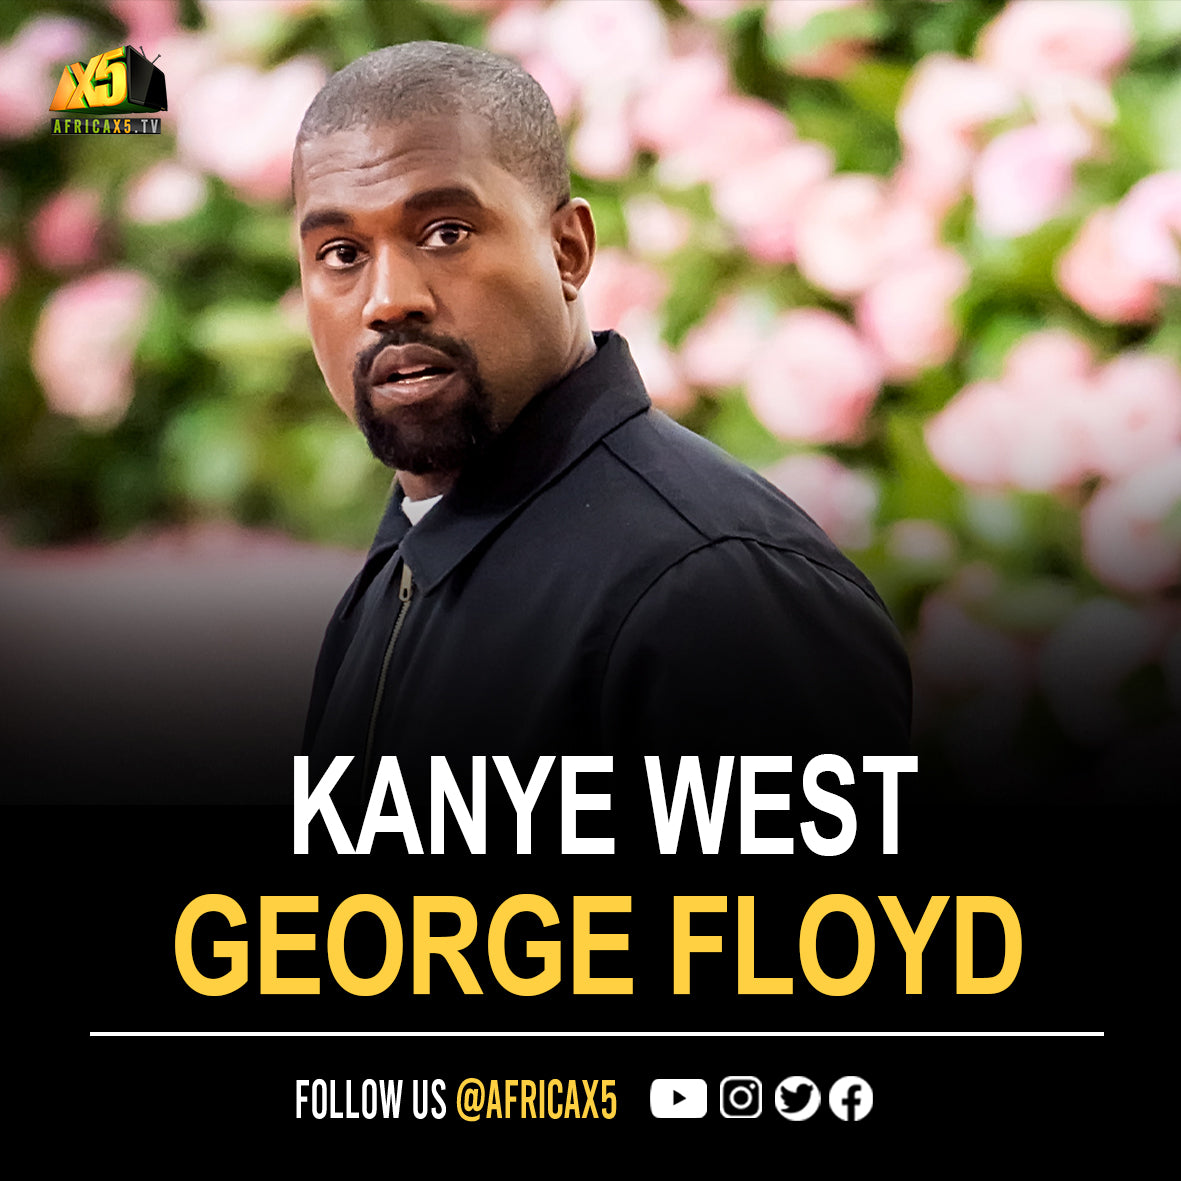 George Floyd’s Family Sues Kanye West For $250m For Saying He Died From Drug Abuse